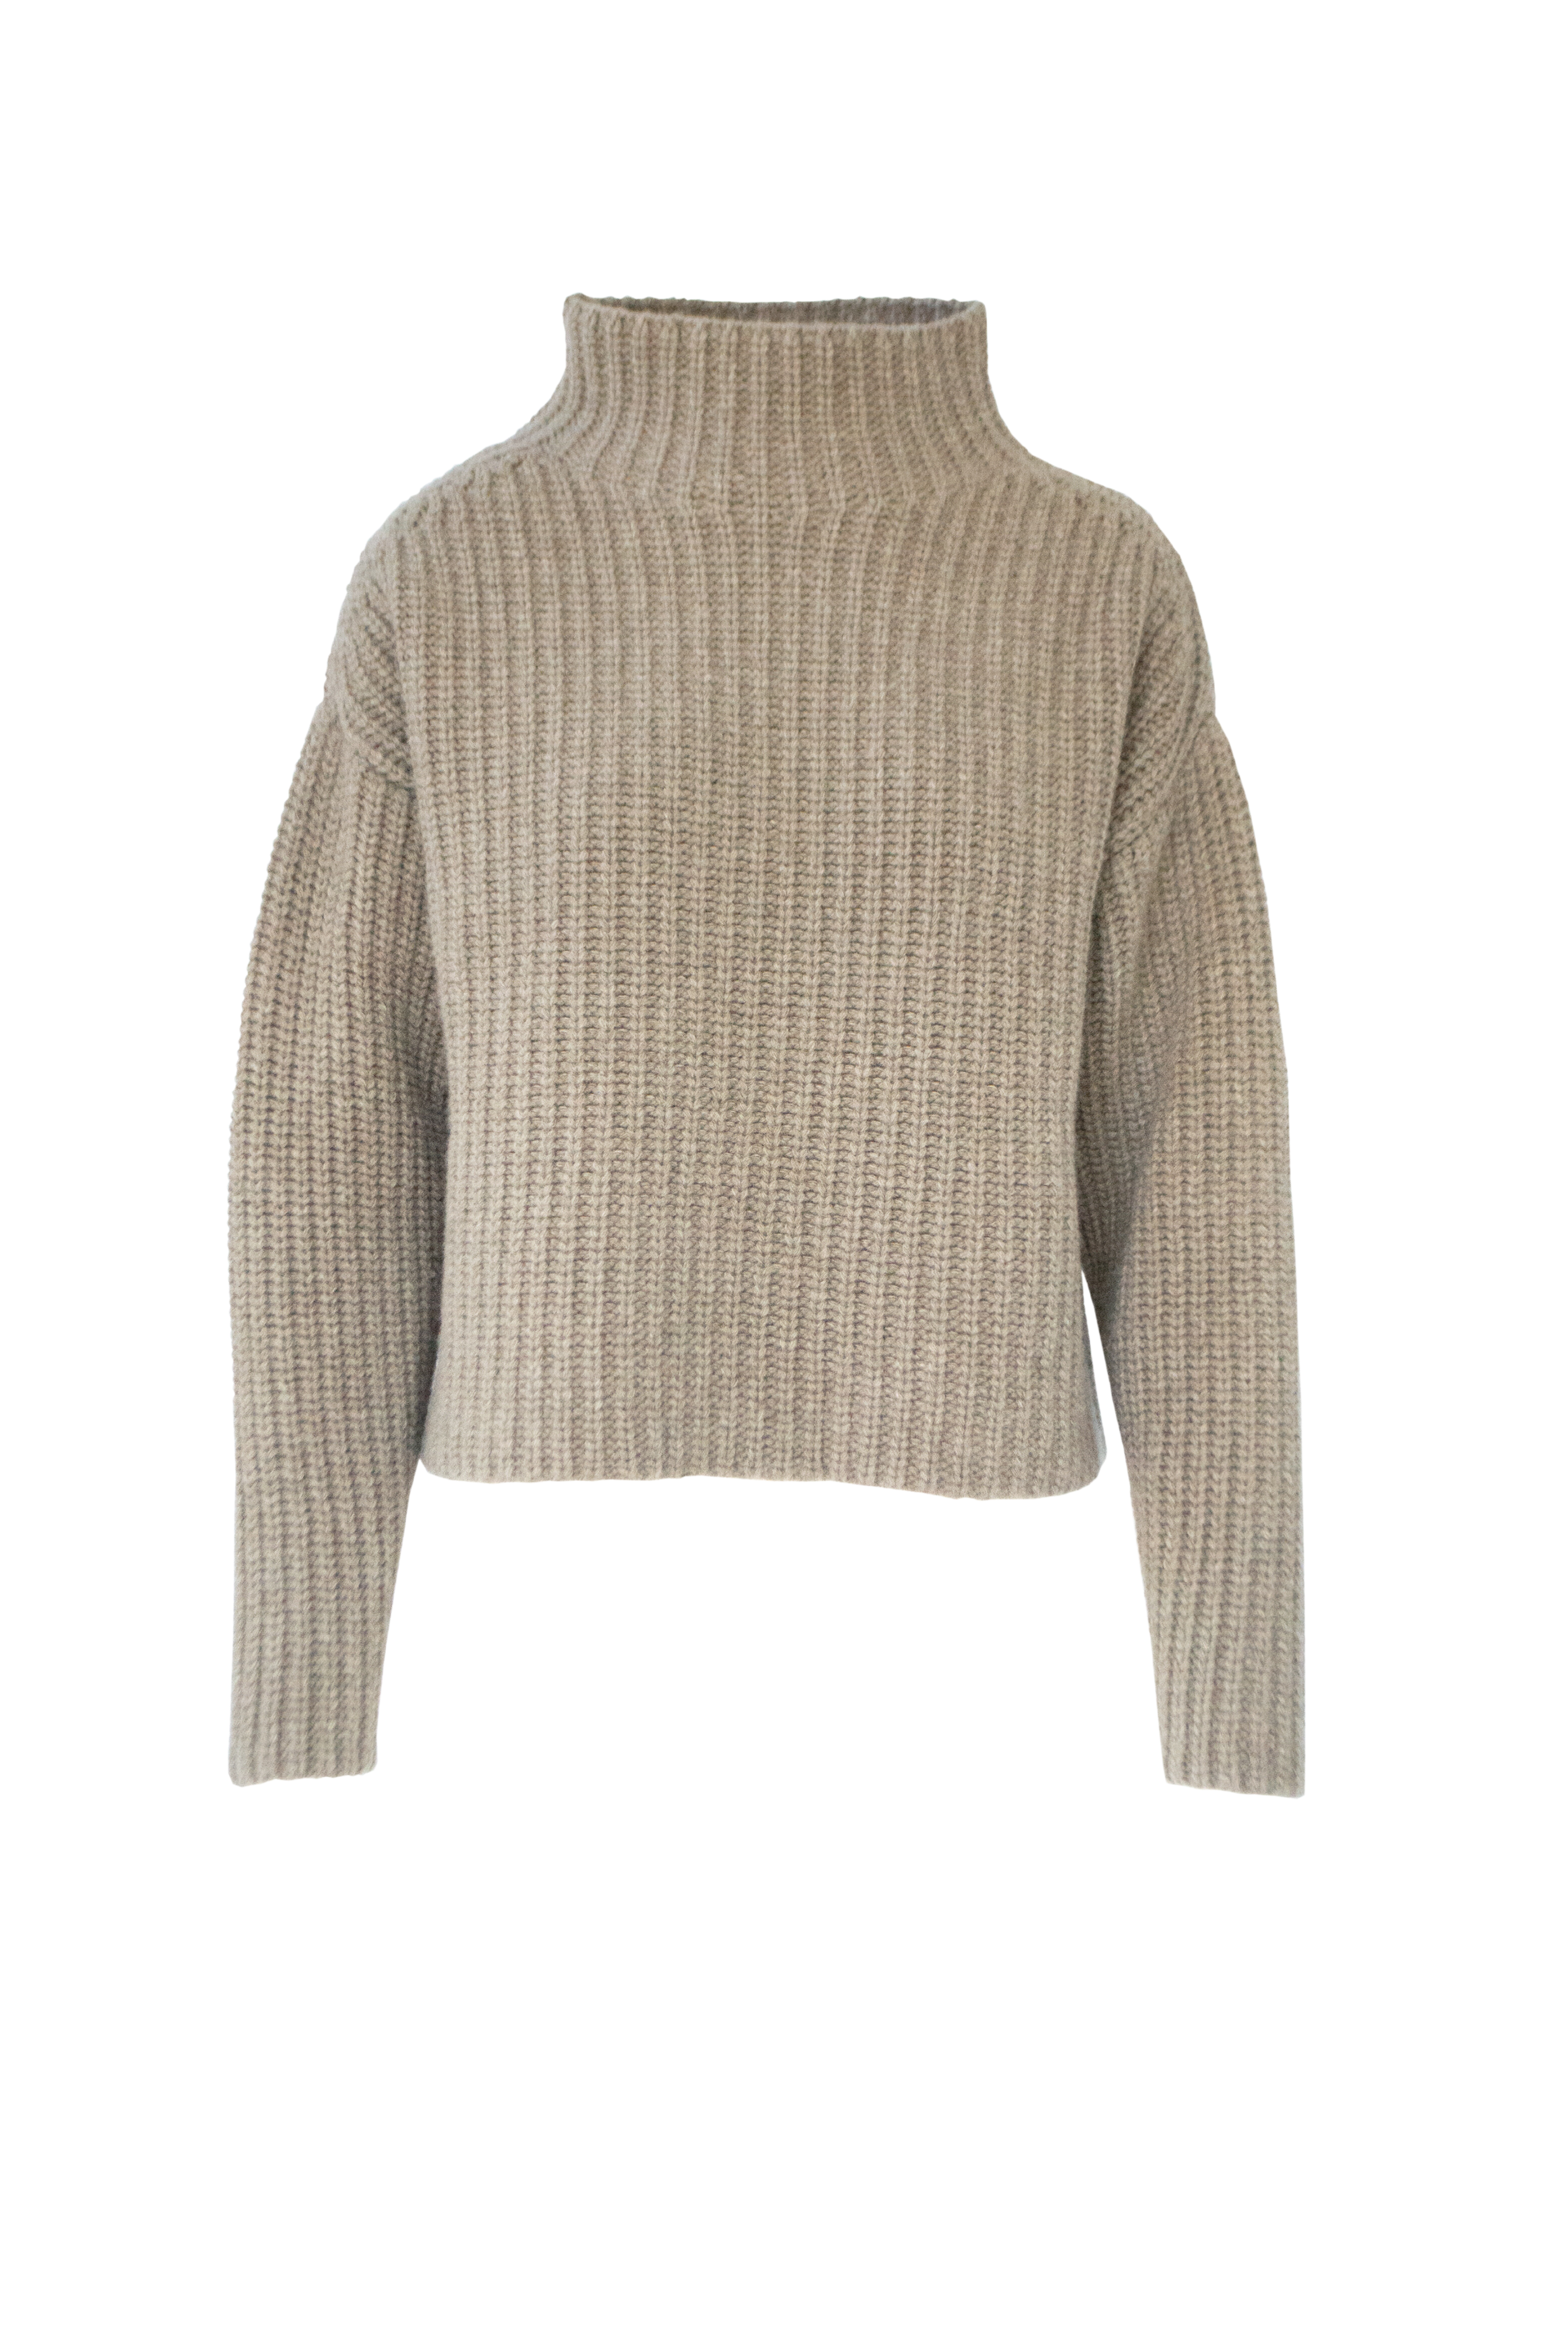 AISLING CAMPS Isabella Turtleneck Sweater